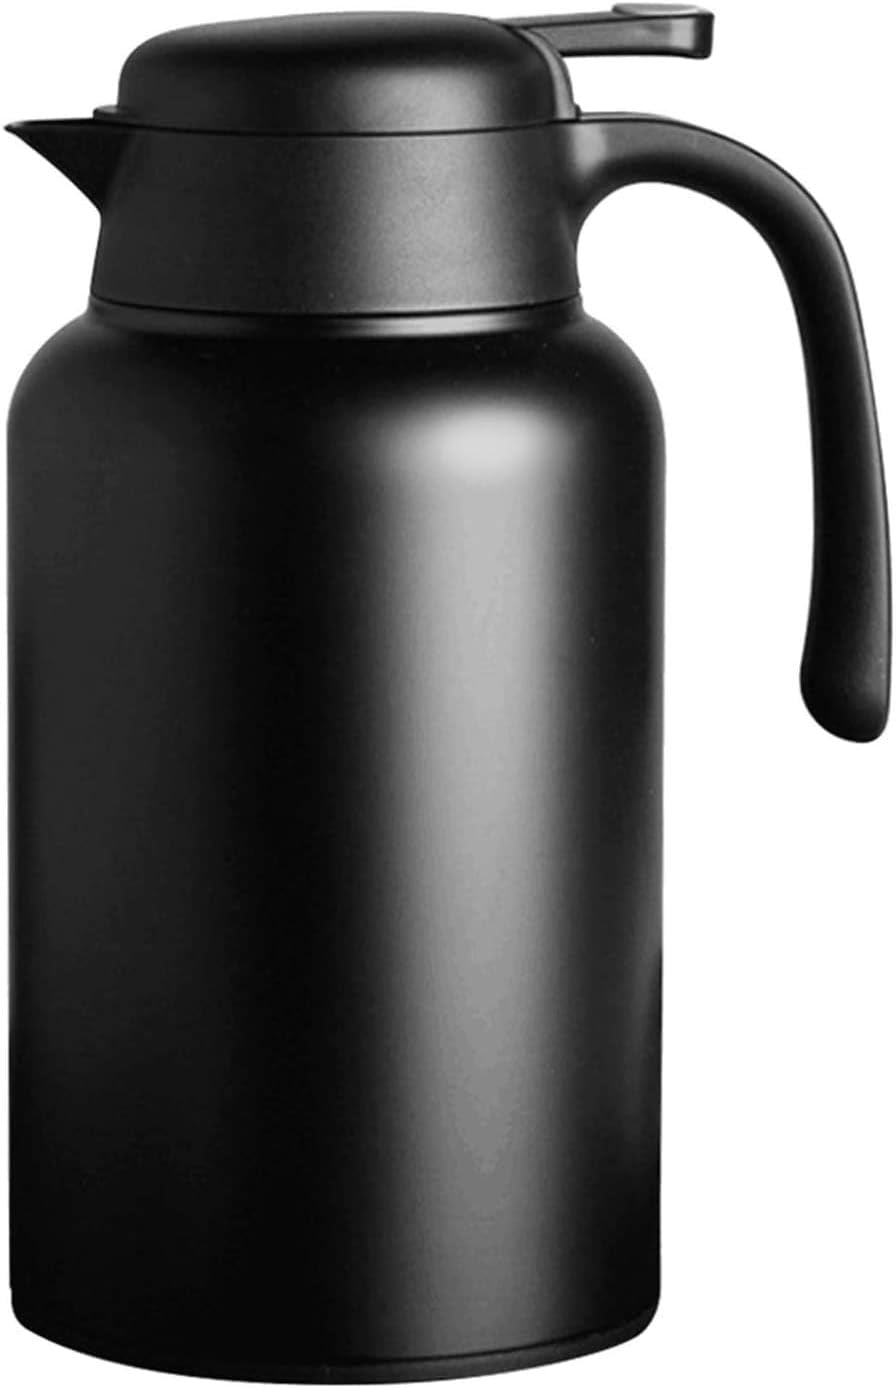 JOYDING 4L/135Oz Thermal Coffee Dispenser Stainless Steel Large